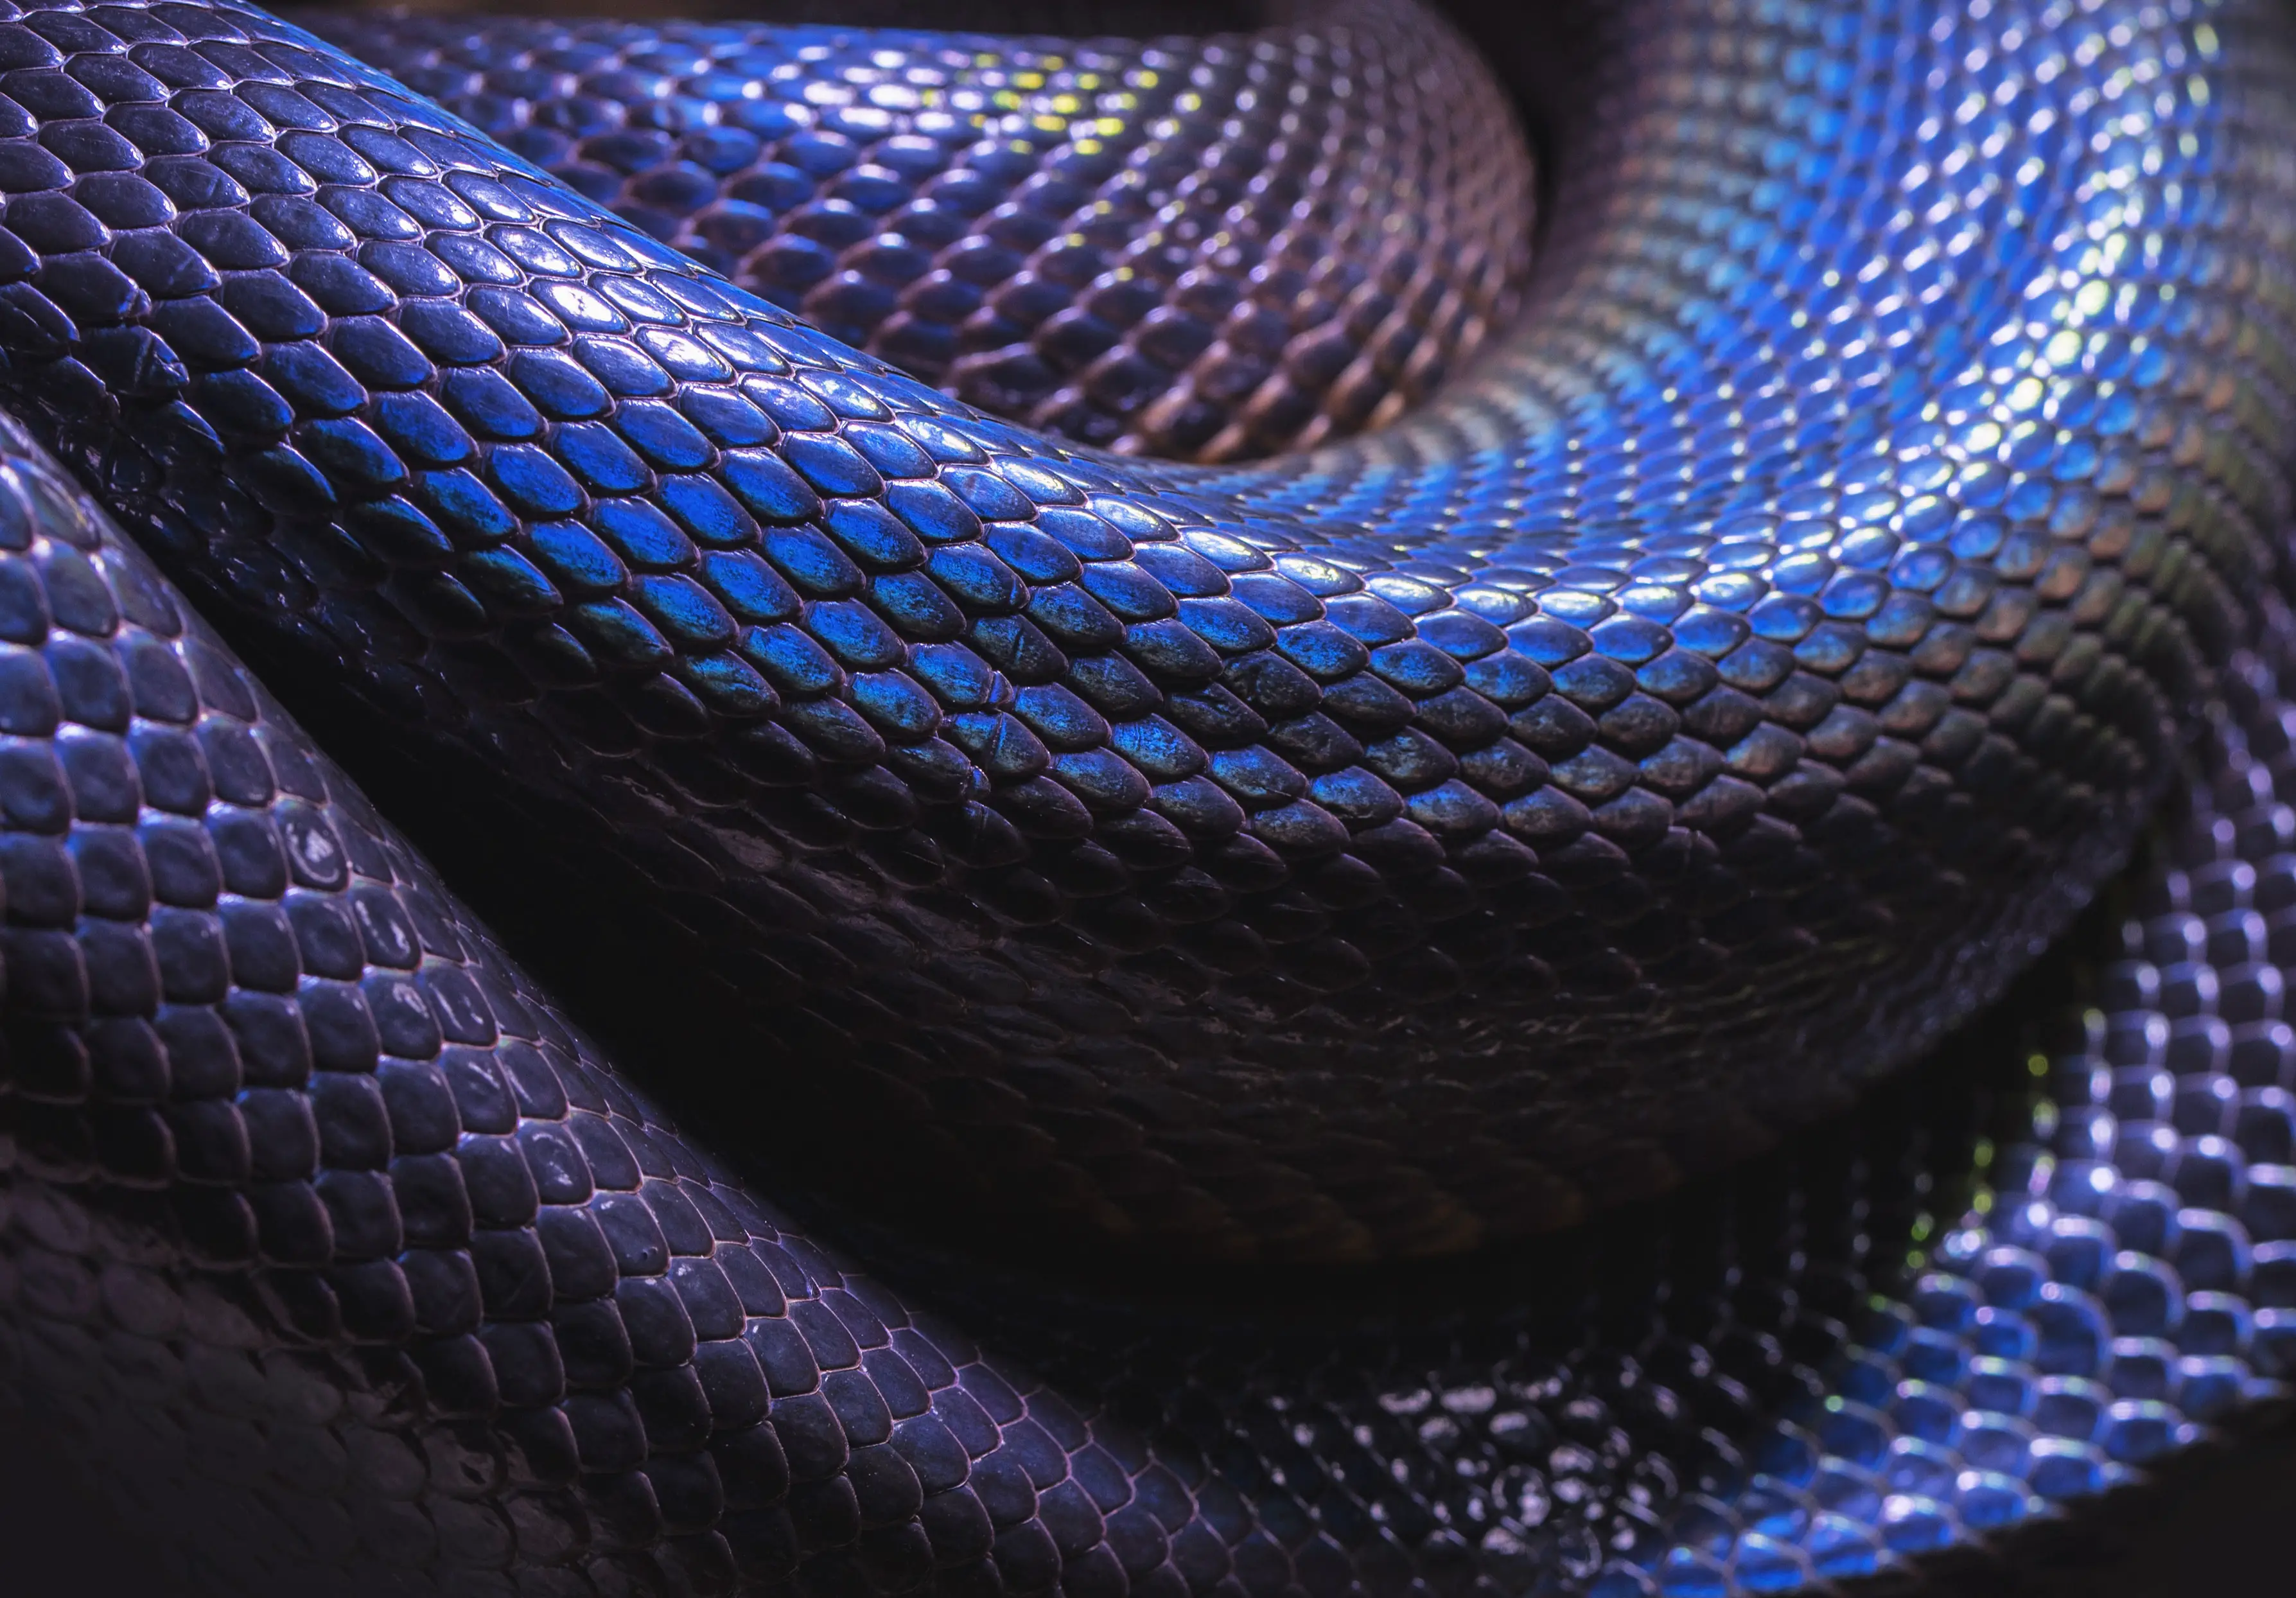 What Does A Purple Snake Symbolize In Dreams?